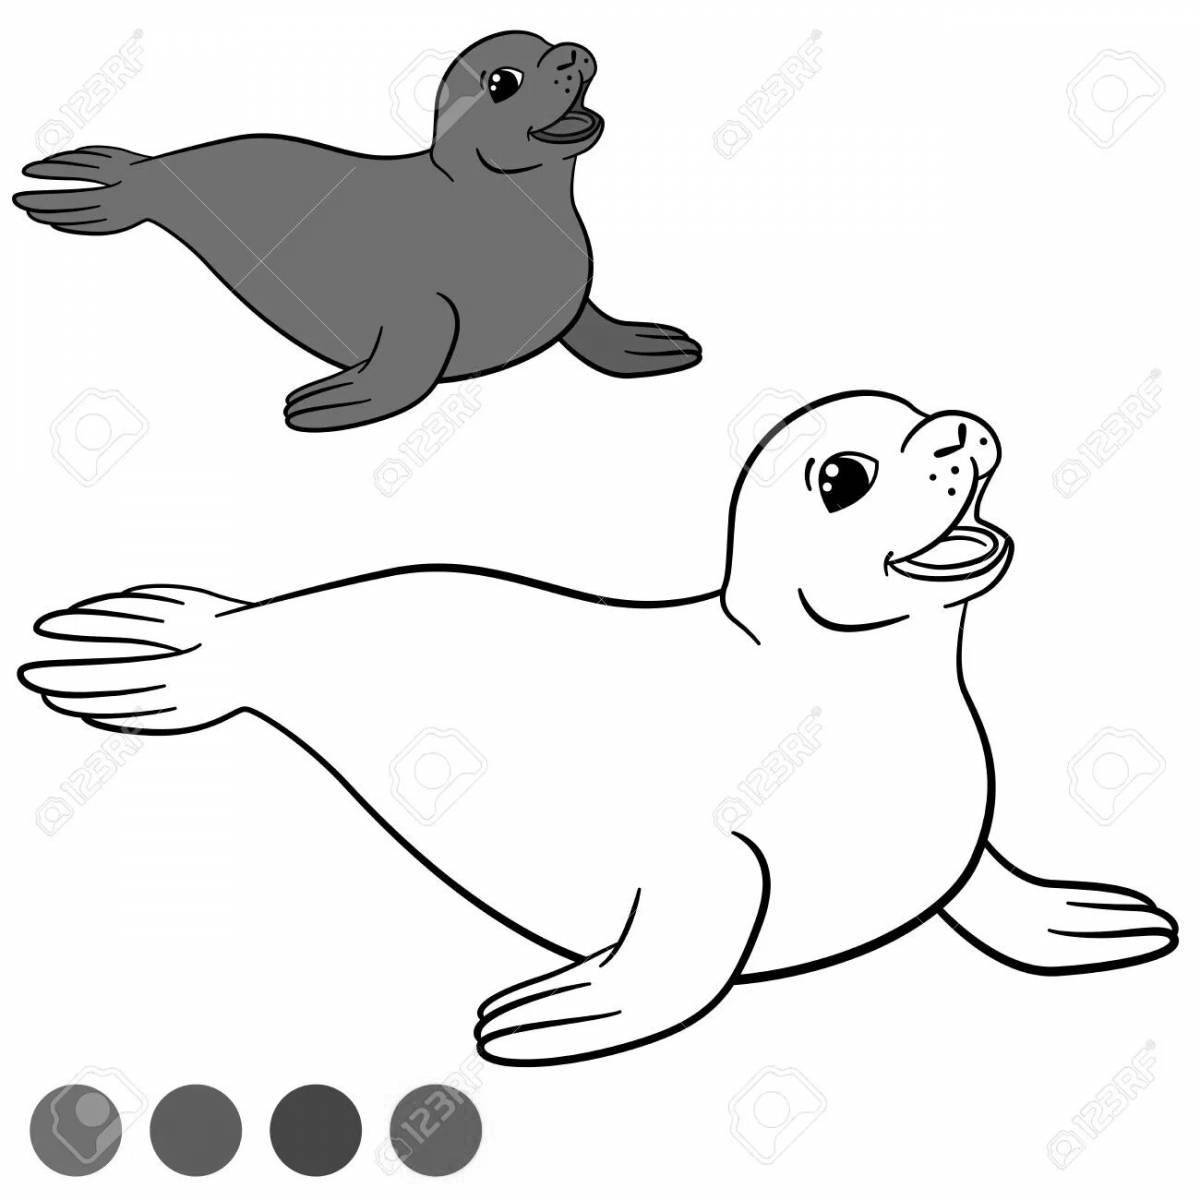 A fascinating coloring of the Baikal seal for children